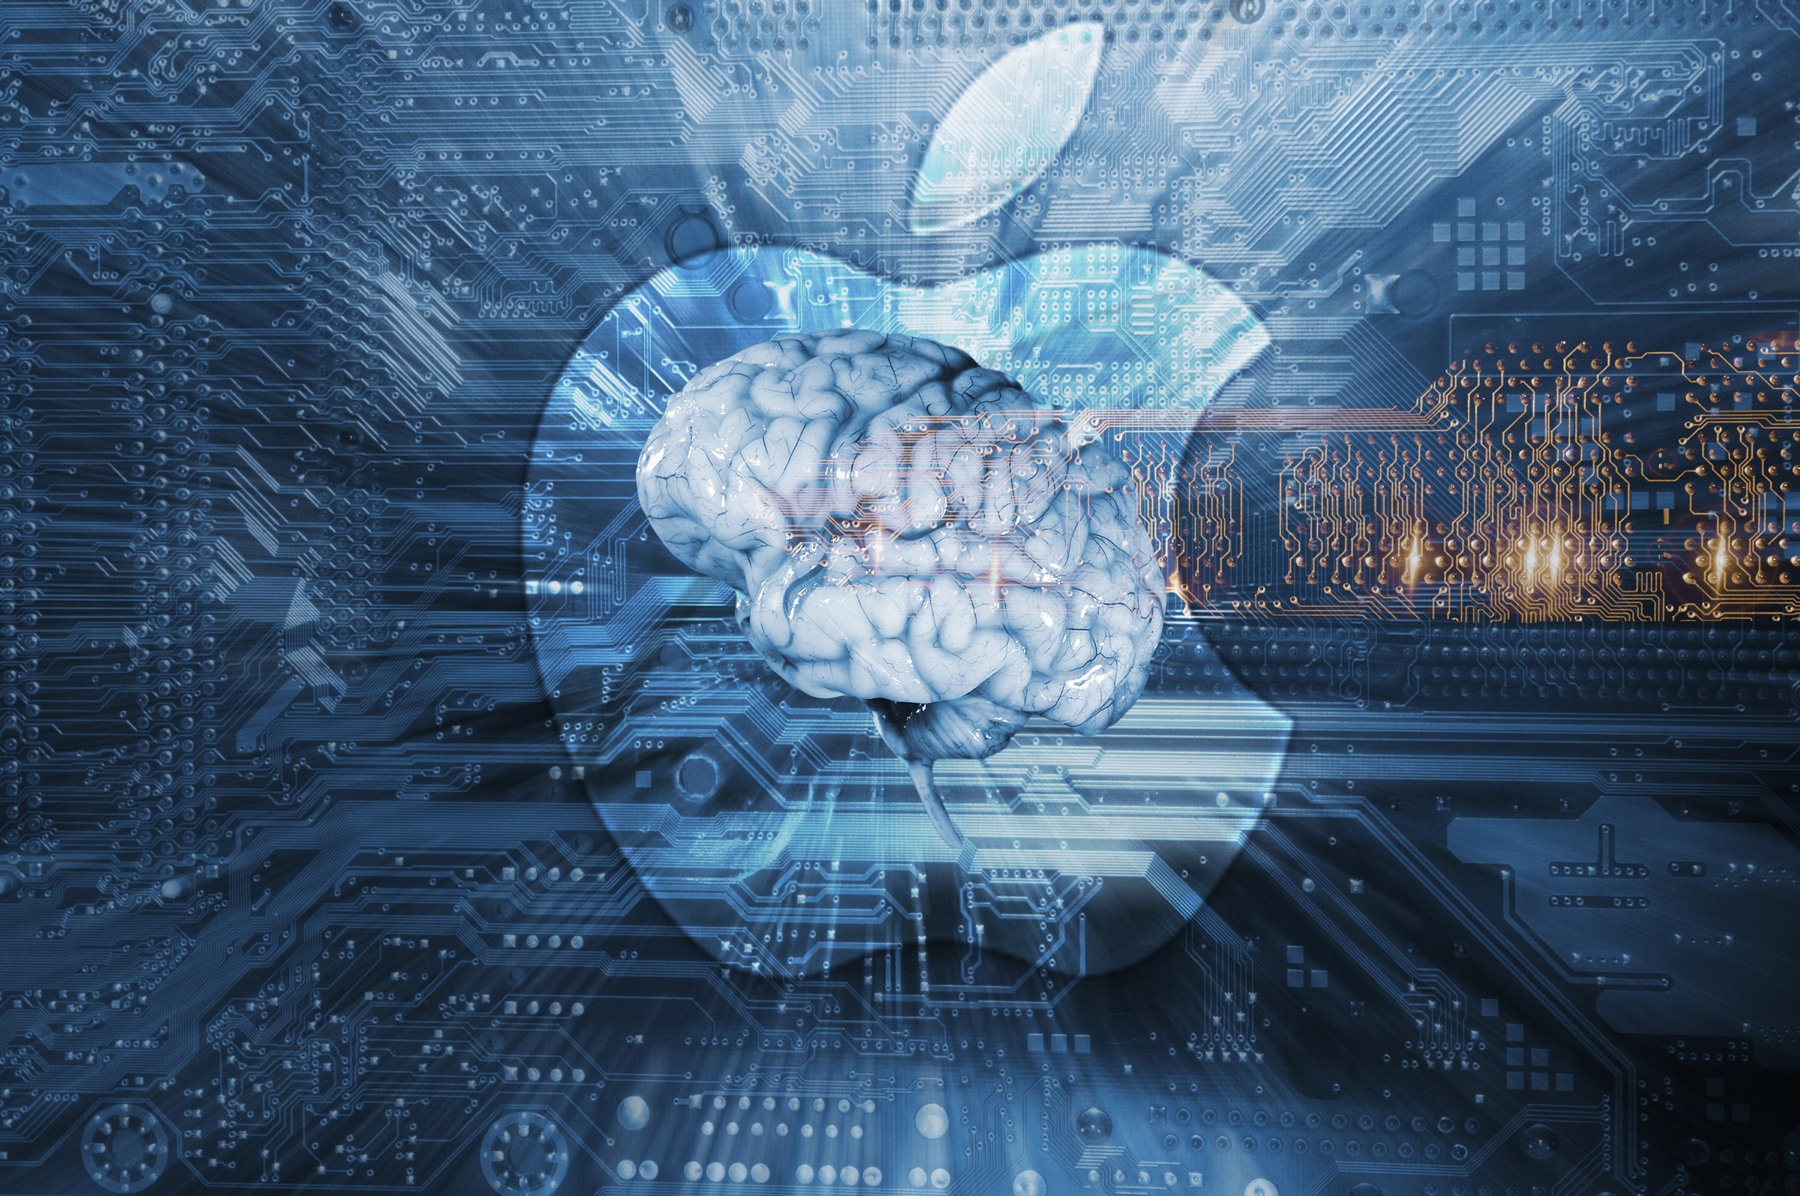 Apple to attend machine learning conference in Canada